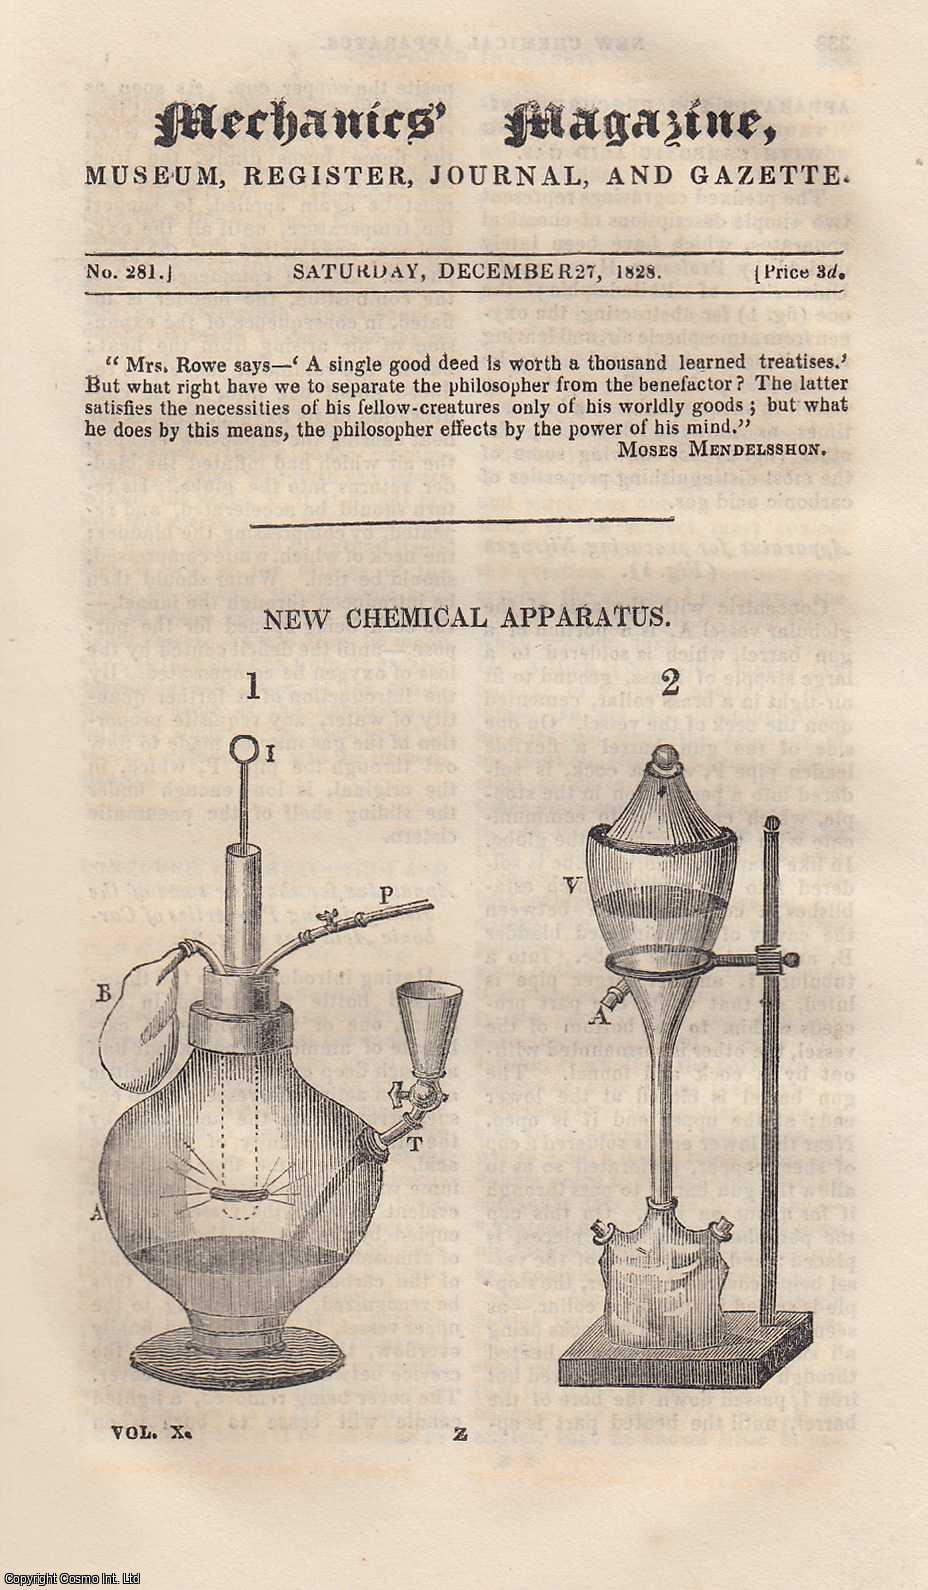 Mechanics Magazine - New Chemical Apparatus; Compound Interest Size & Weight of The Earth; Board of Excise, and Projects For Assaying of Spirits; New Steam Valve, etc. Mechanics Magazine, Museum, Register, Journal and Gazette. Issue No. 281. A complete rare weekly issue of the Mechanics' Magazine, 1828.